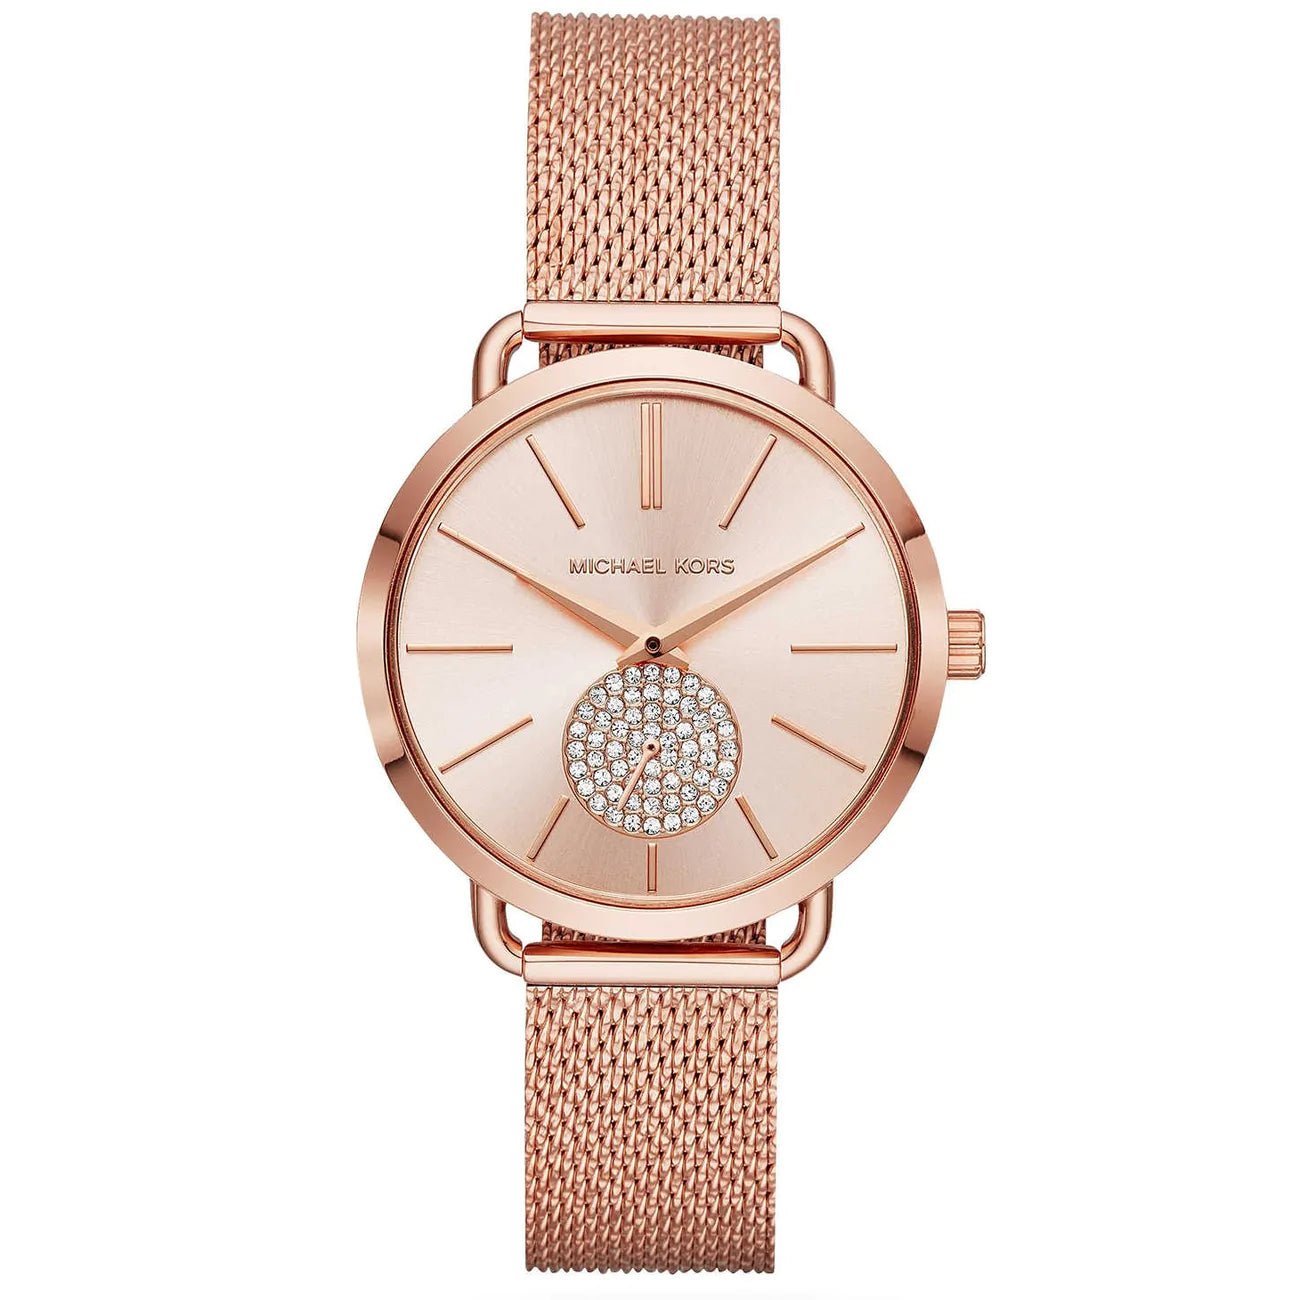 Michael Kors Ladies Watch Portia Rose Gold Crystal MK3845 - Watches & Crystals